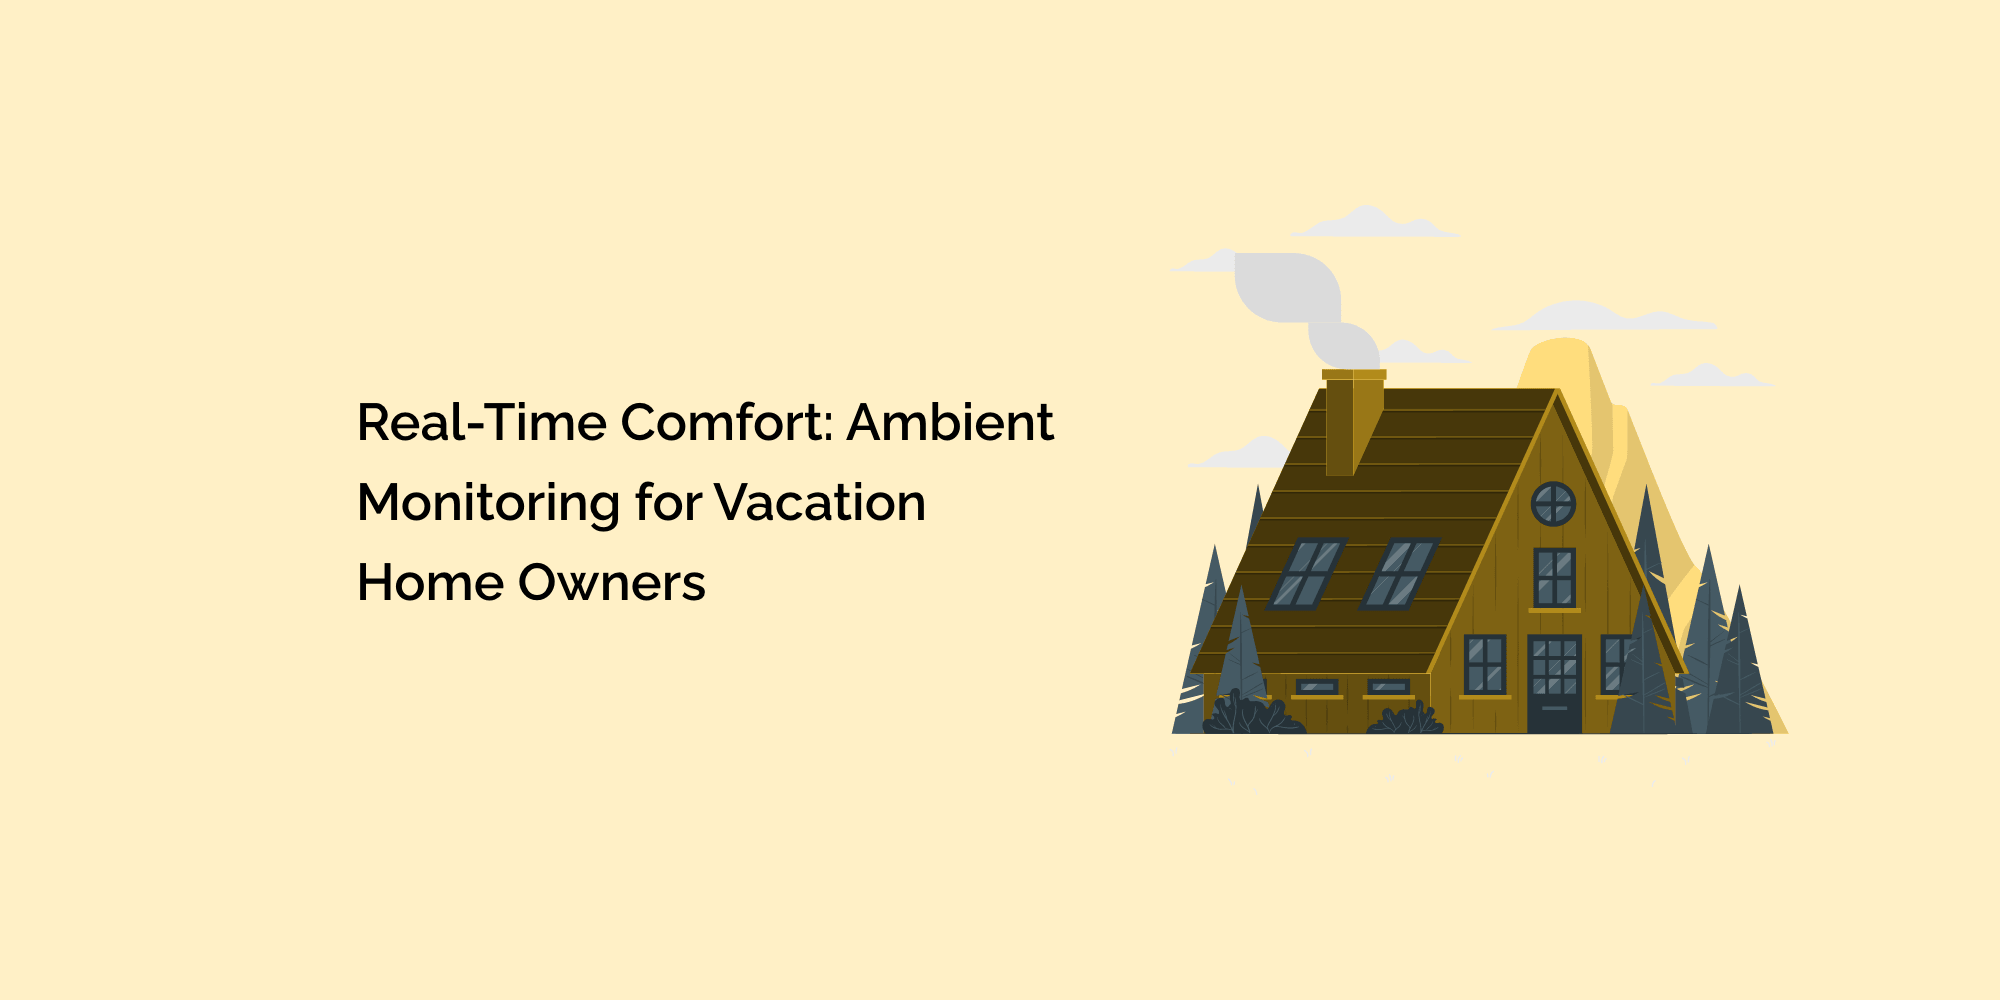 Real-Time Comfort: Ambient Monitoring for Vacation Home Owners